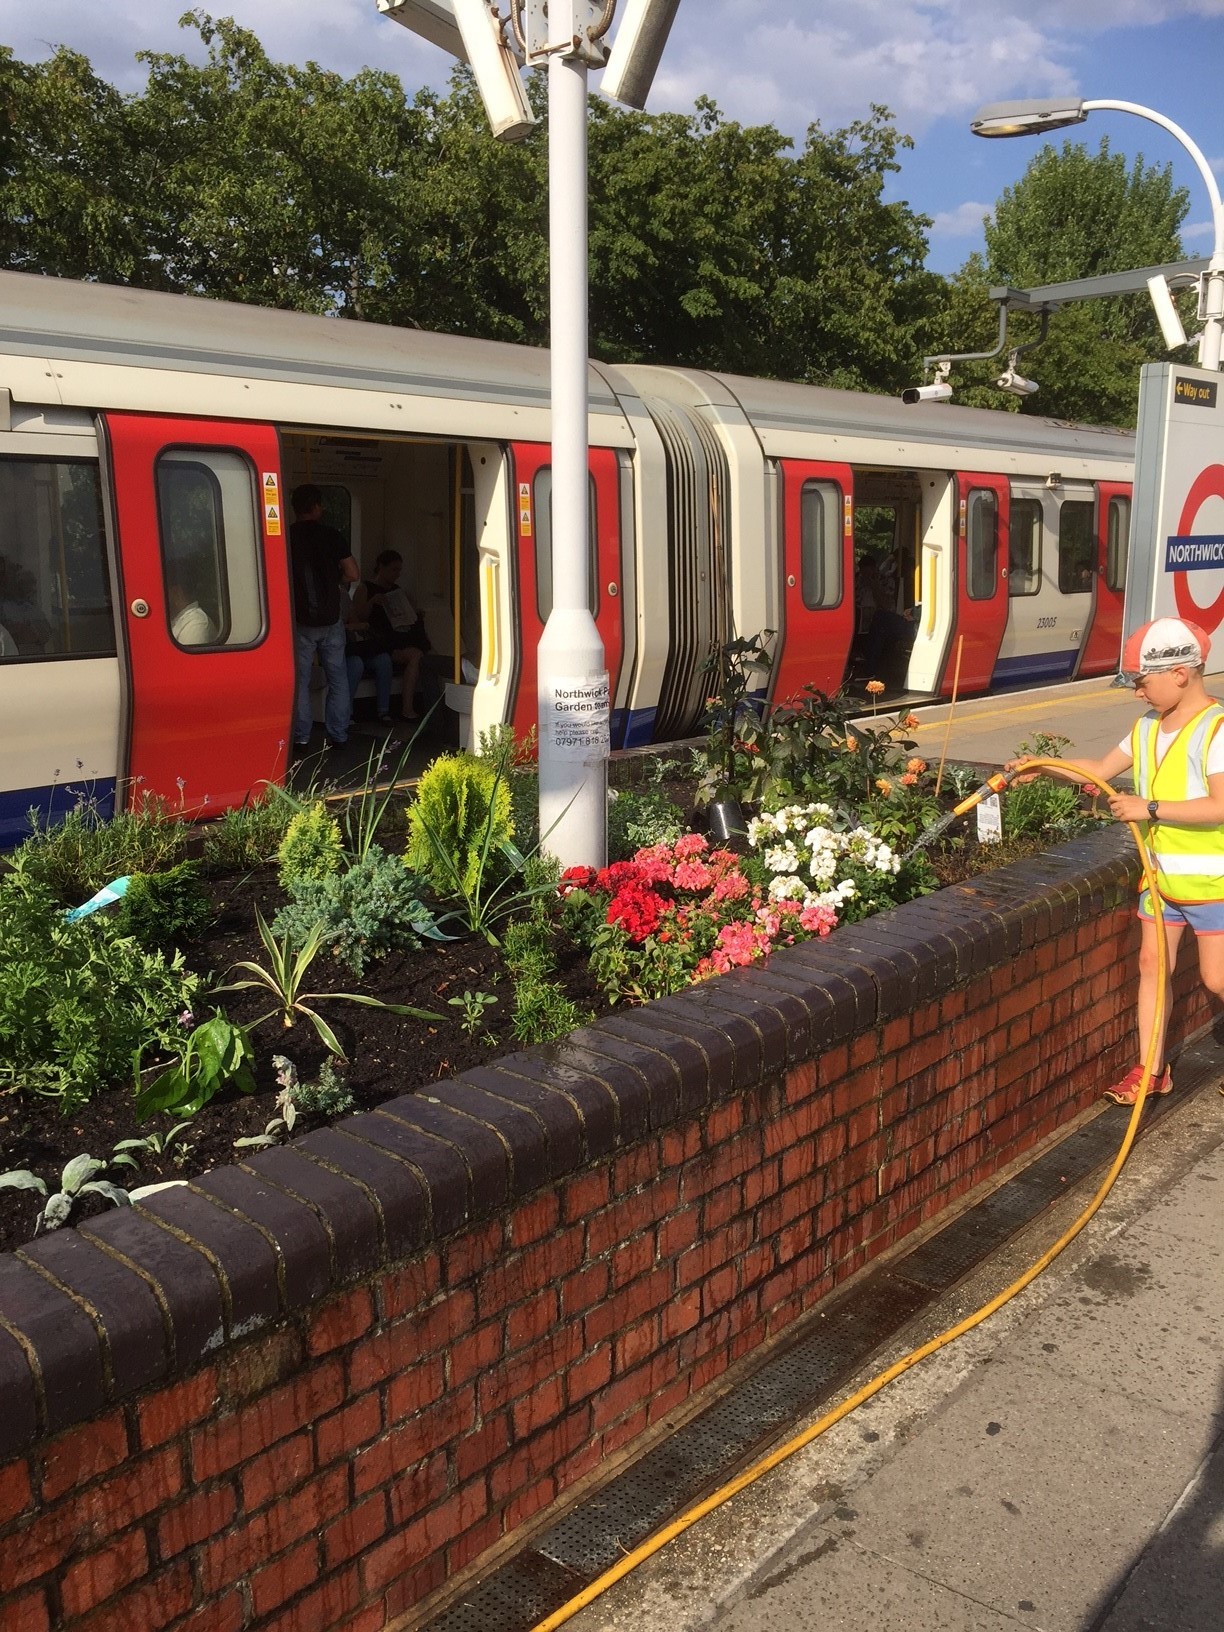 Commuters take snaps of seven-year-old boy’s finished garden at train station